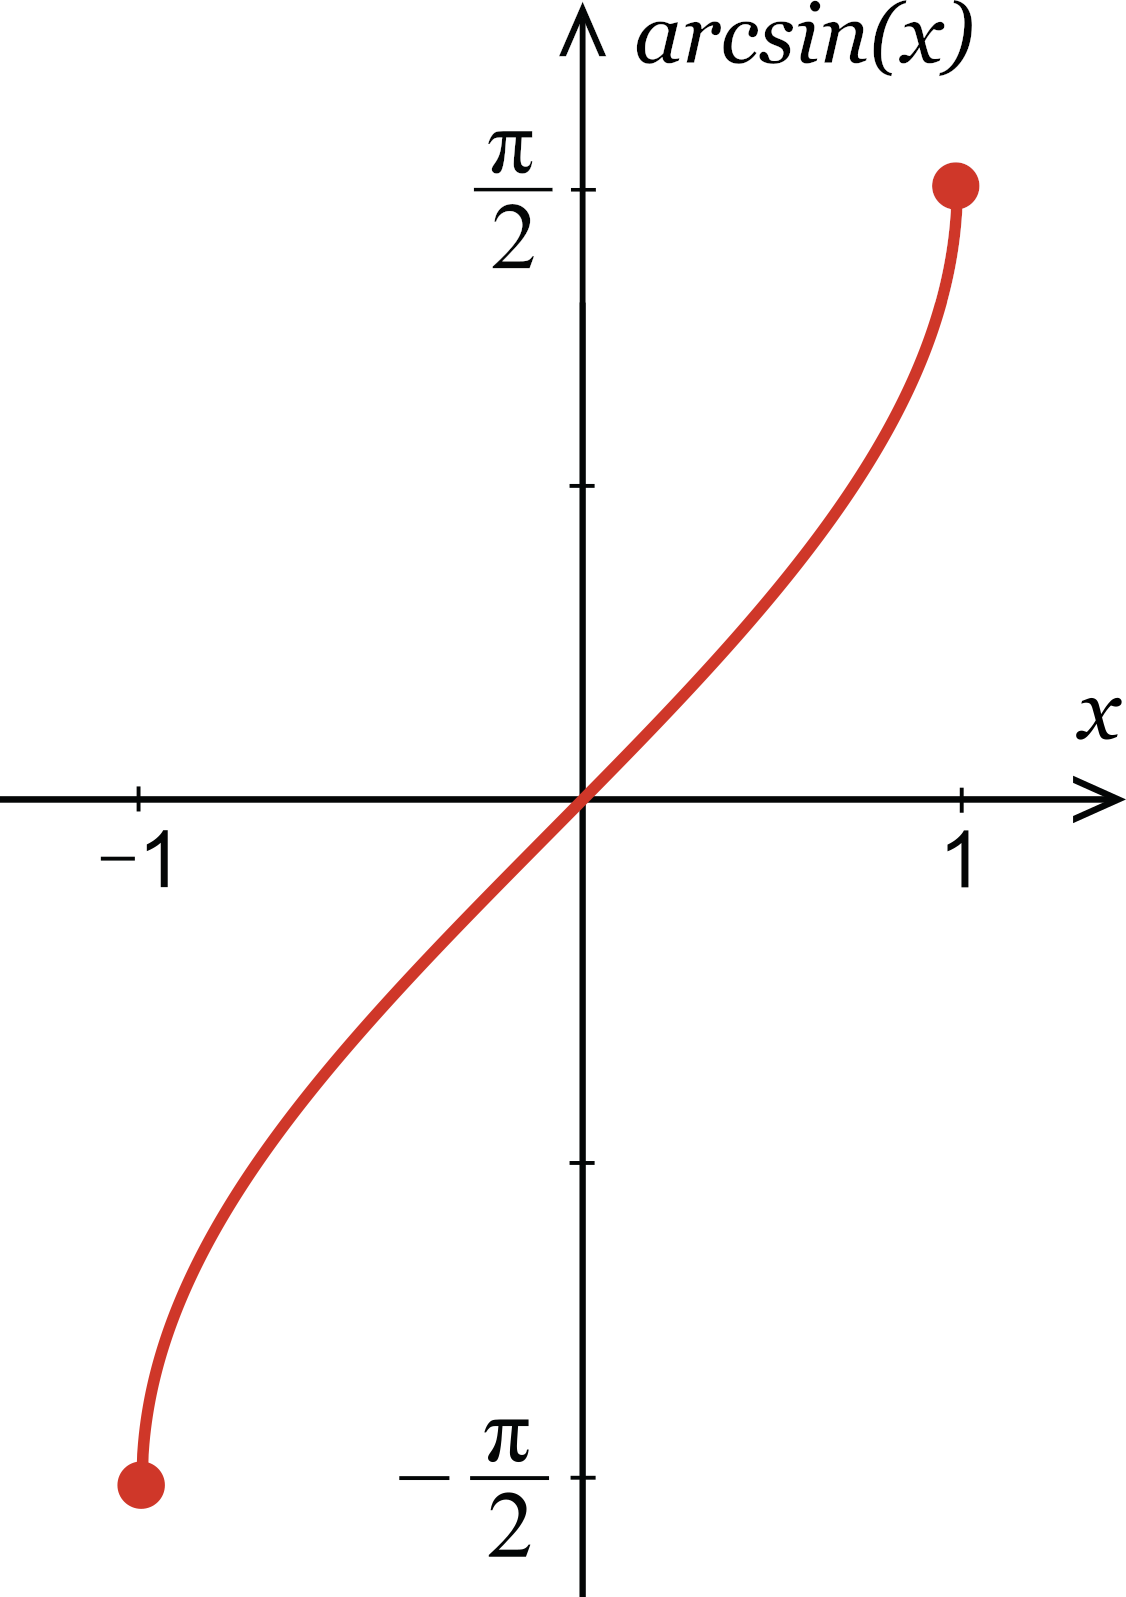 illustration showing the the range of possible values for arcsin from the coordinate (-1, -pi/2) to (1, pi/2)